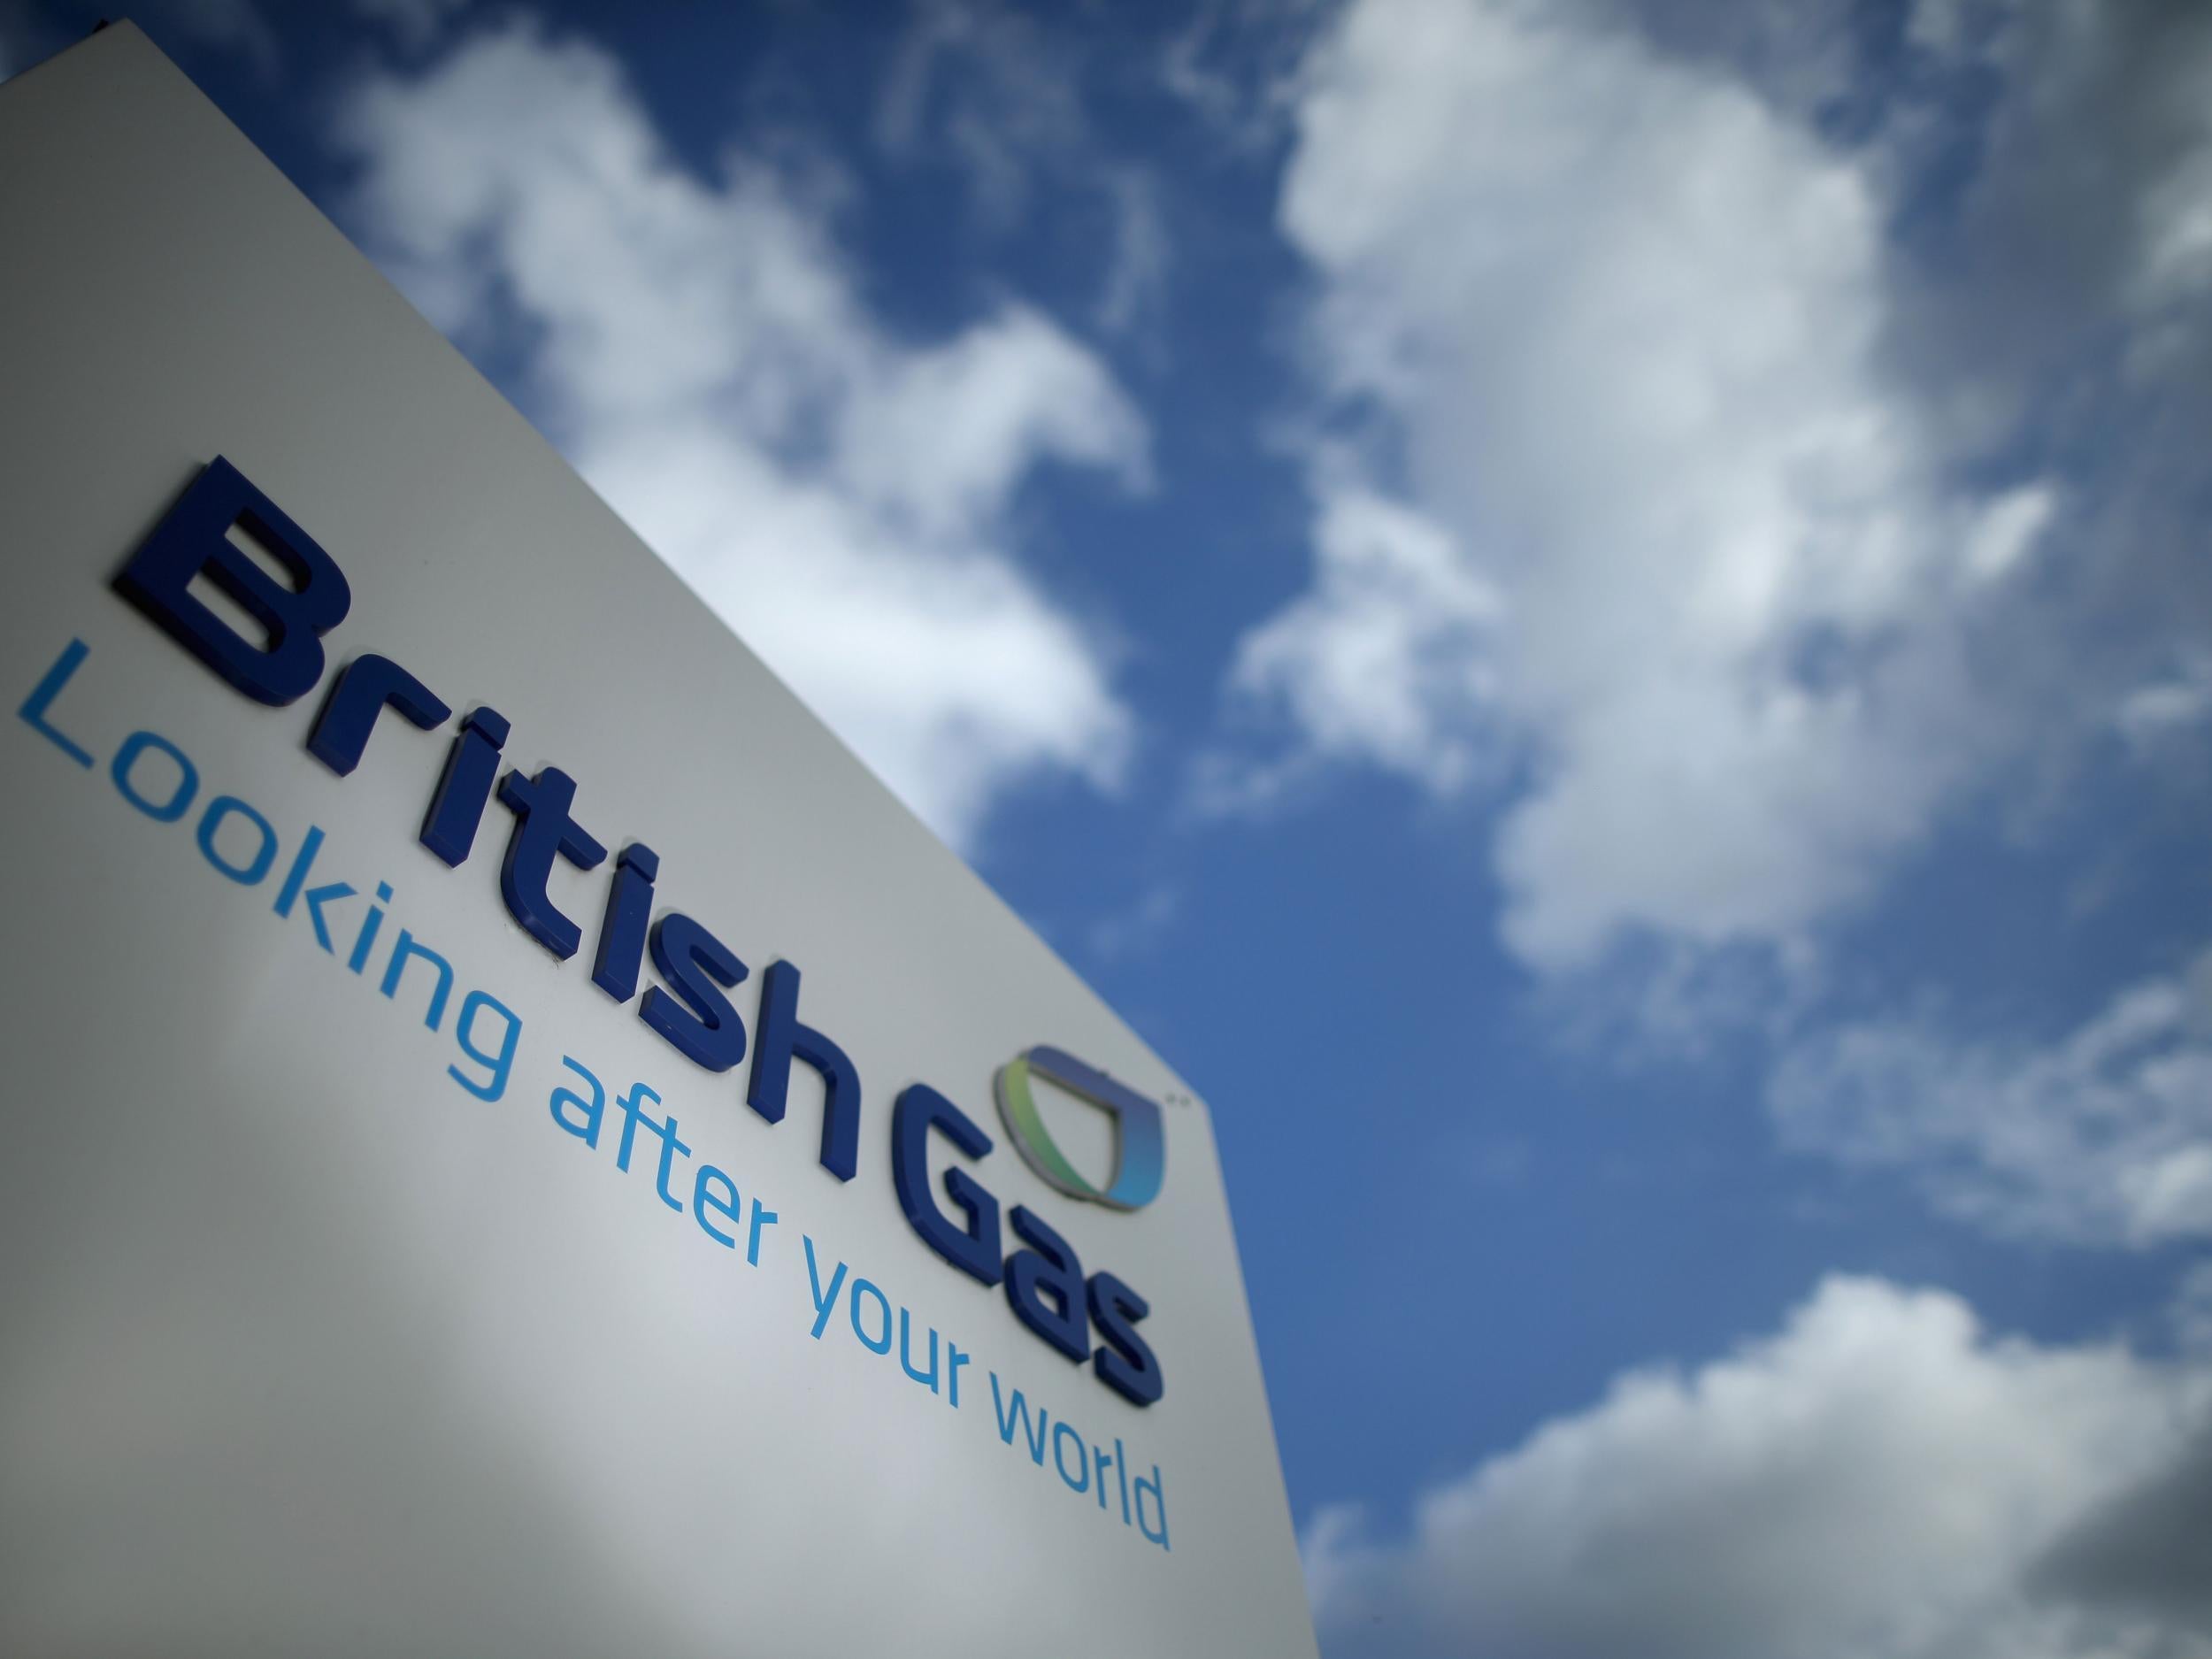 British Gas owner Centrica insists the price increase reflects rising distribution costs and various regulatory requirements